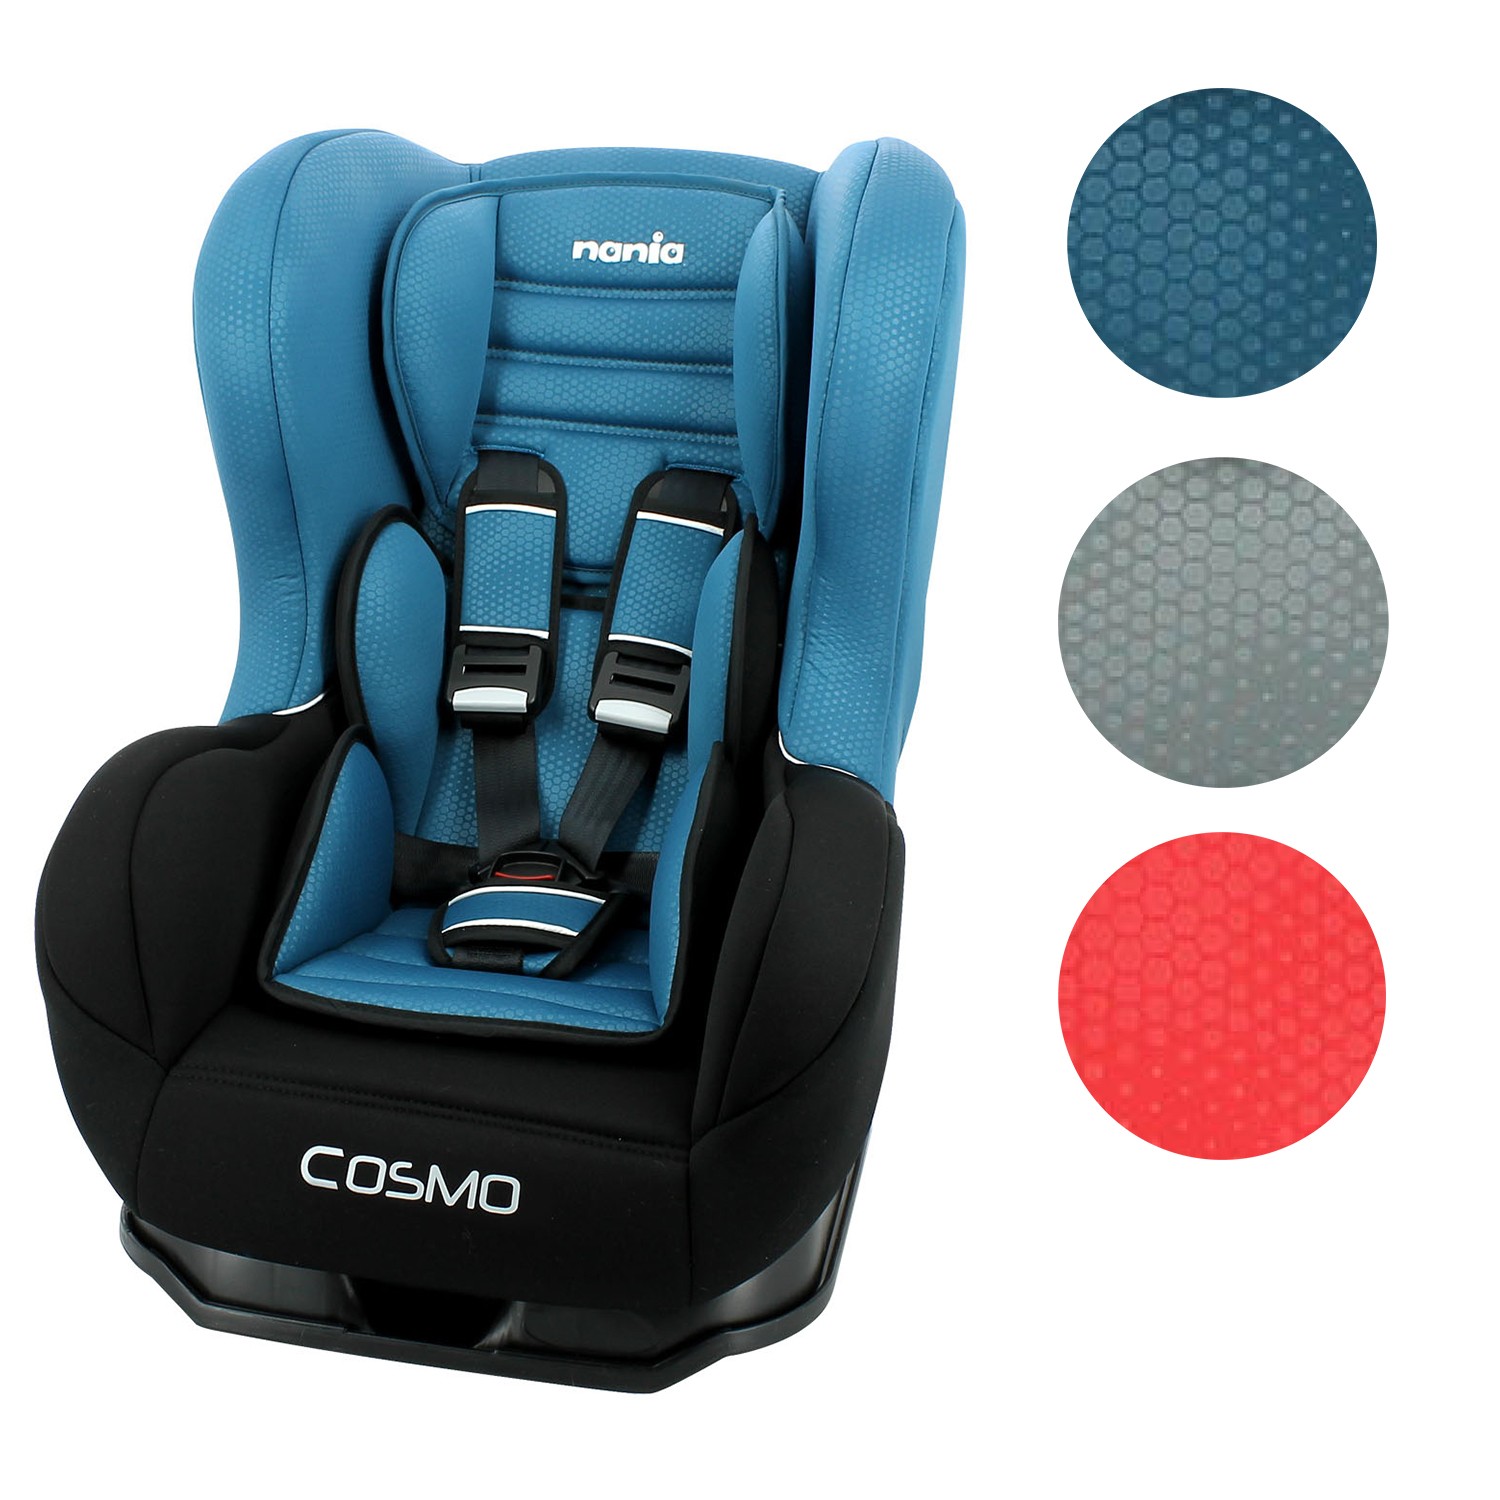 Siège auto cosmo 0-18 kg, Gamme luxe